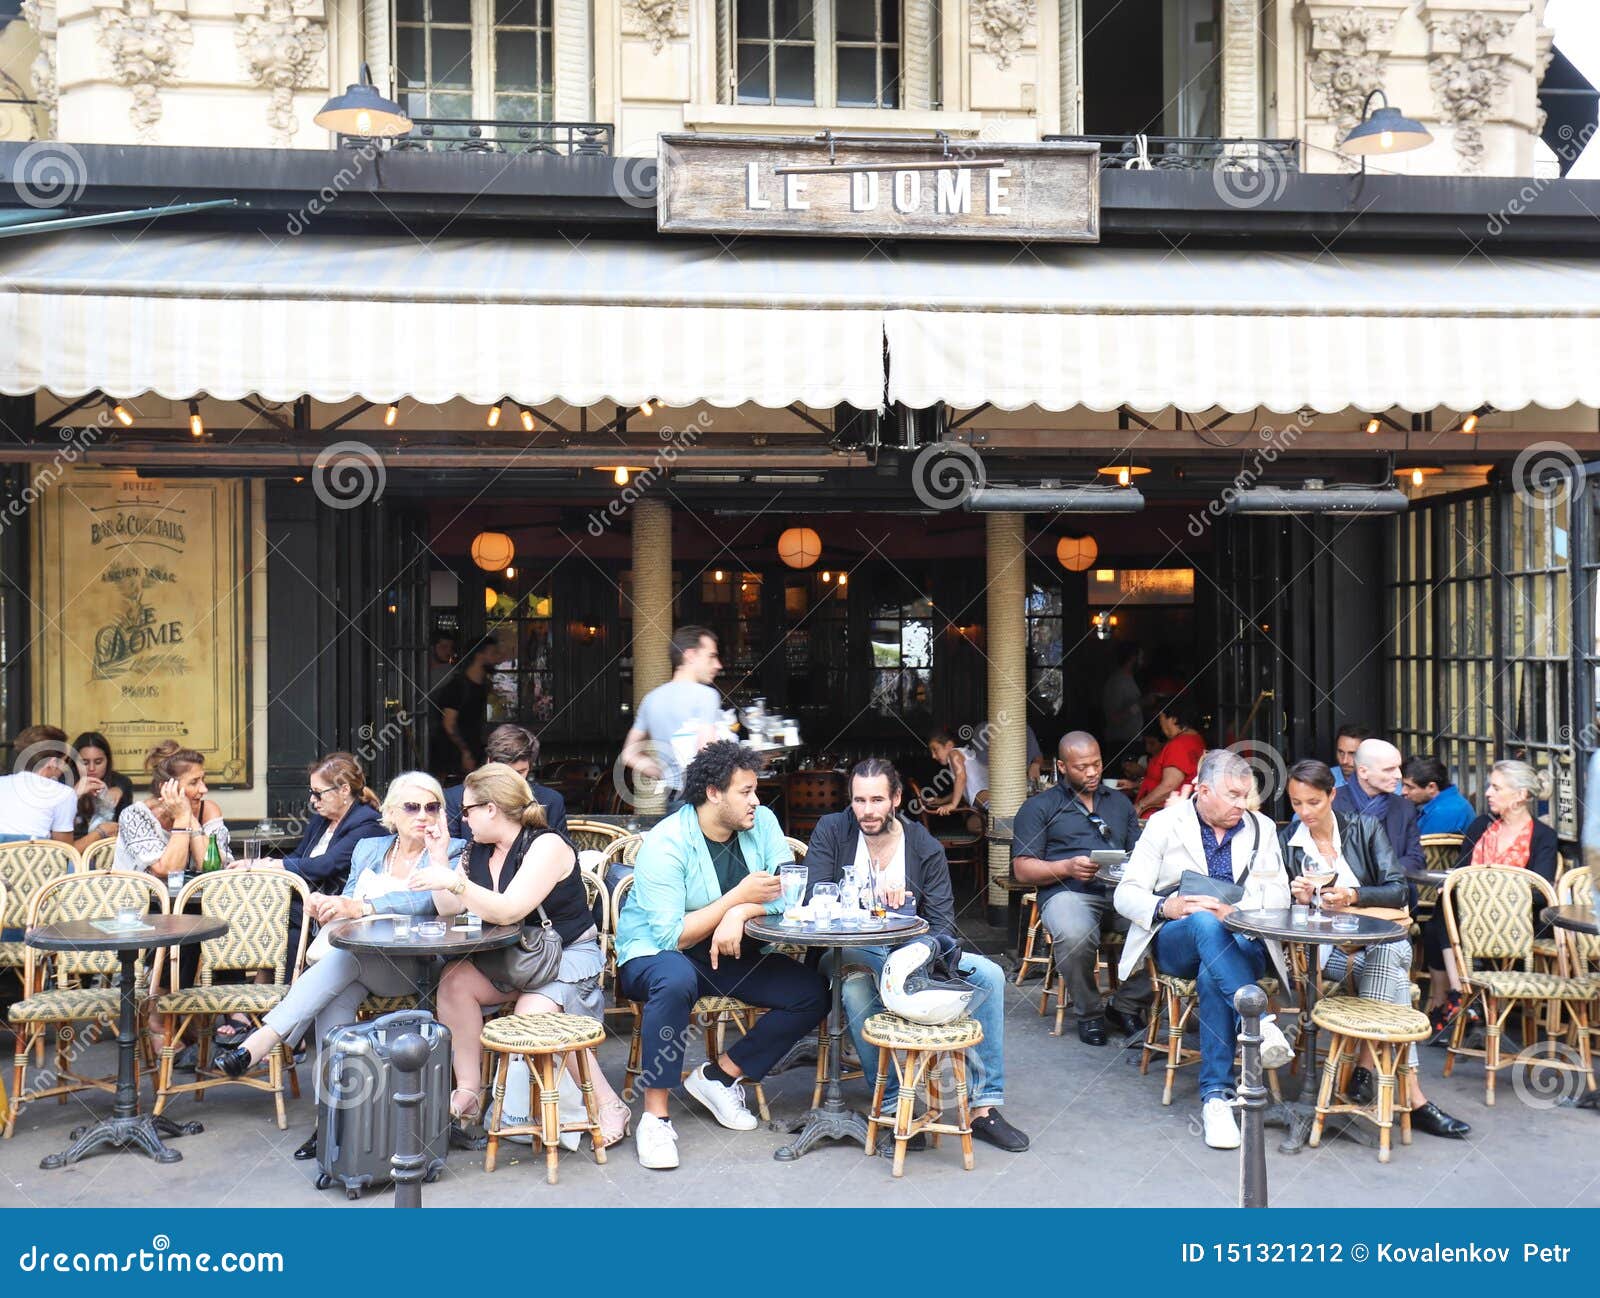 Le Champ De Mars is Traditonal French Cafe Located Near the Eiffel ...